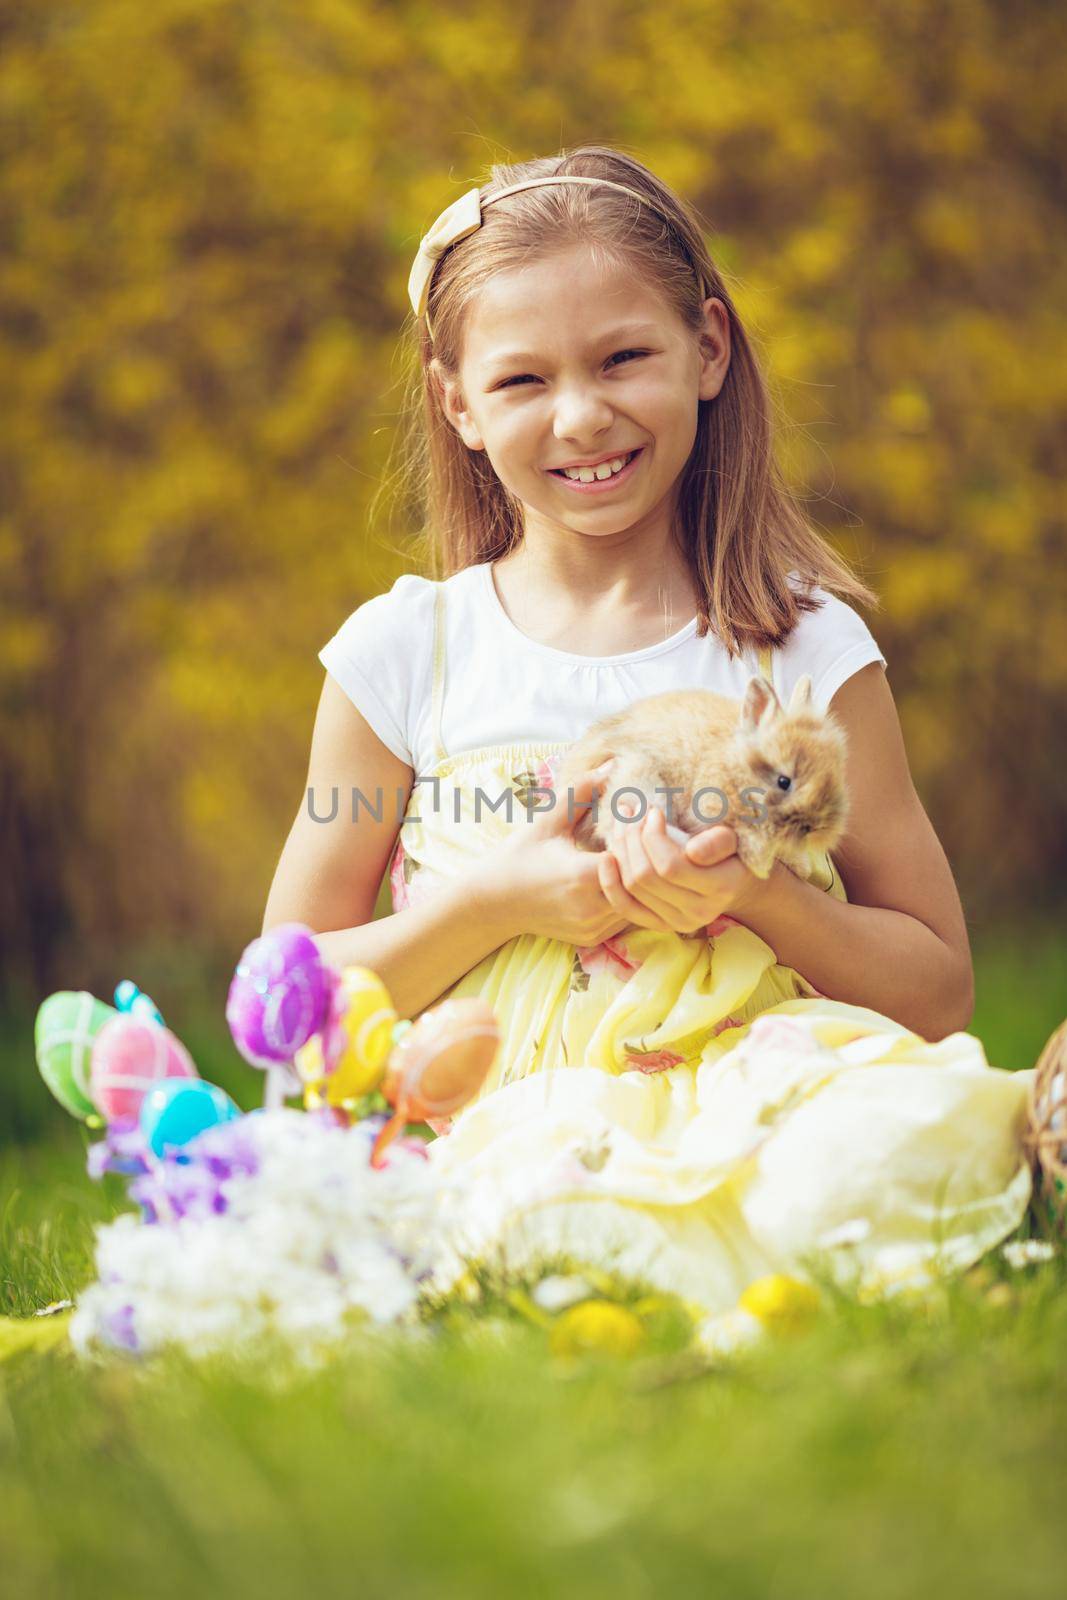 Beautiful smiling little girl holding cute bunny and sitting on the grass with Easter eggs and flowers in spring holidays. Looking at camera. 